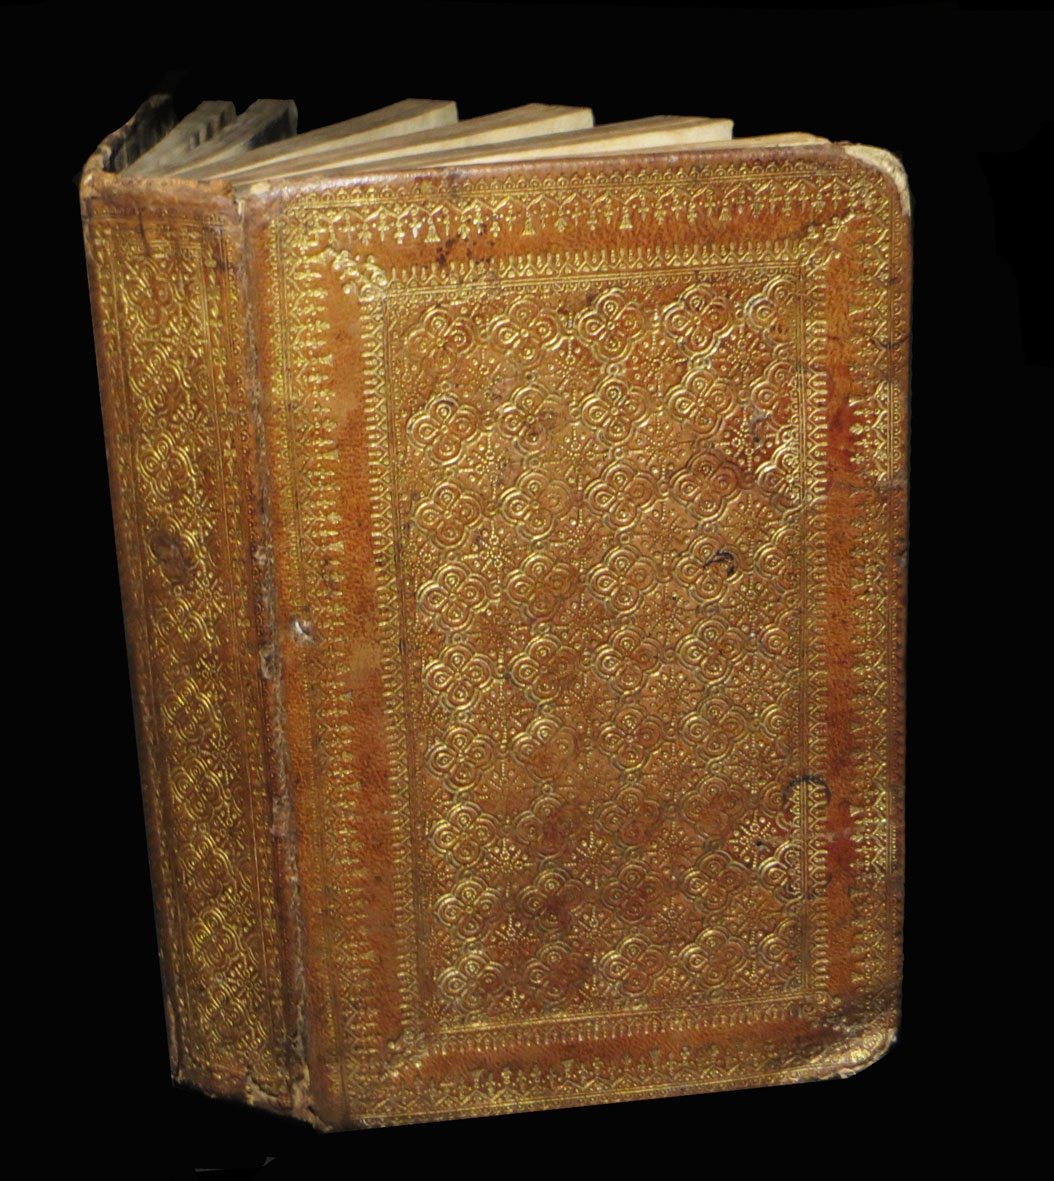 [binding Binding] Cotton (stone) - The Office Of The Virgin Mary. 1637.